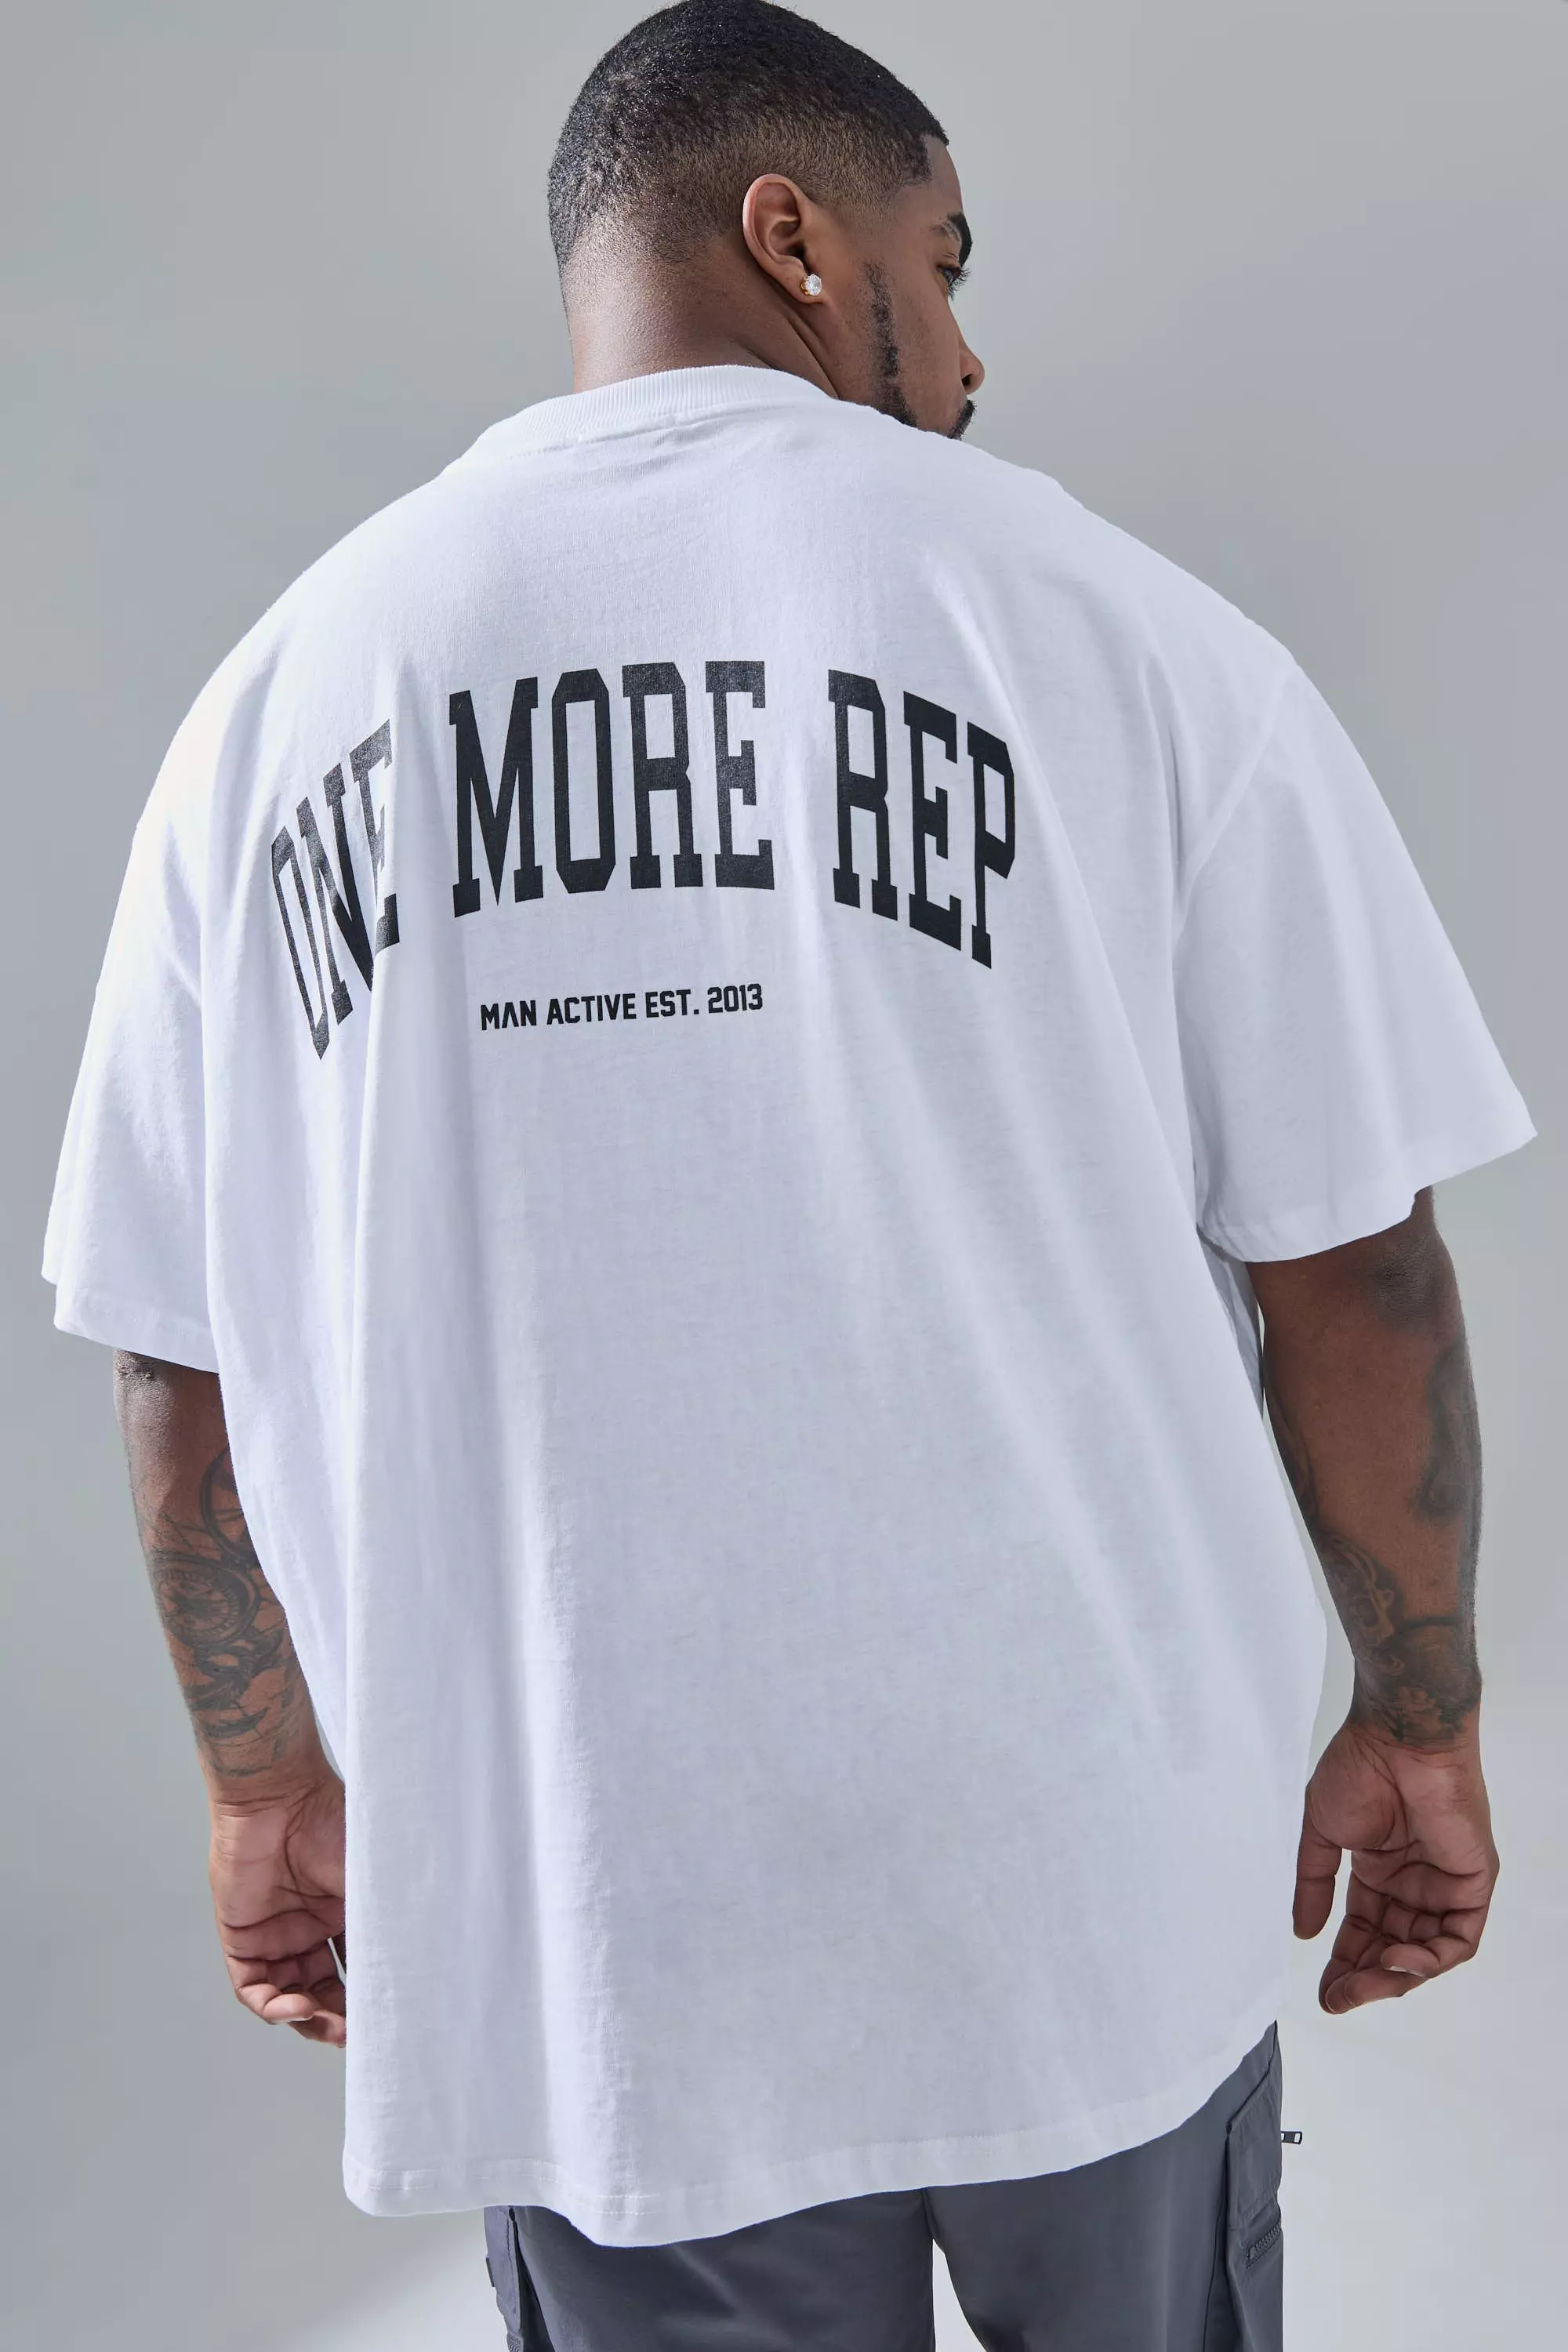 Plus Man Active Gym Oversized Rep T-shirt White